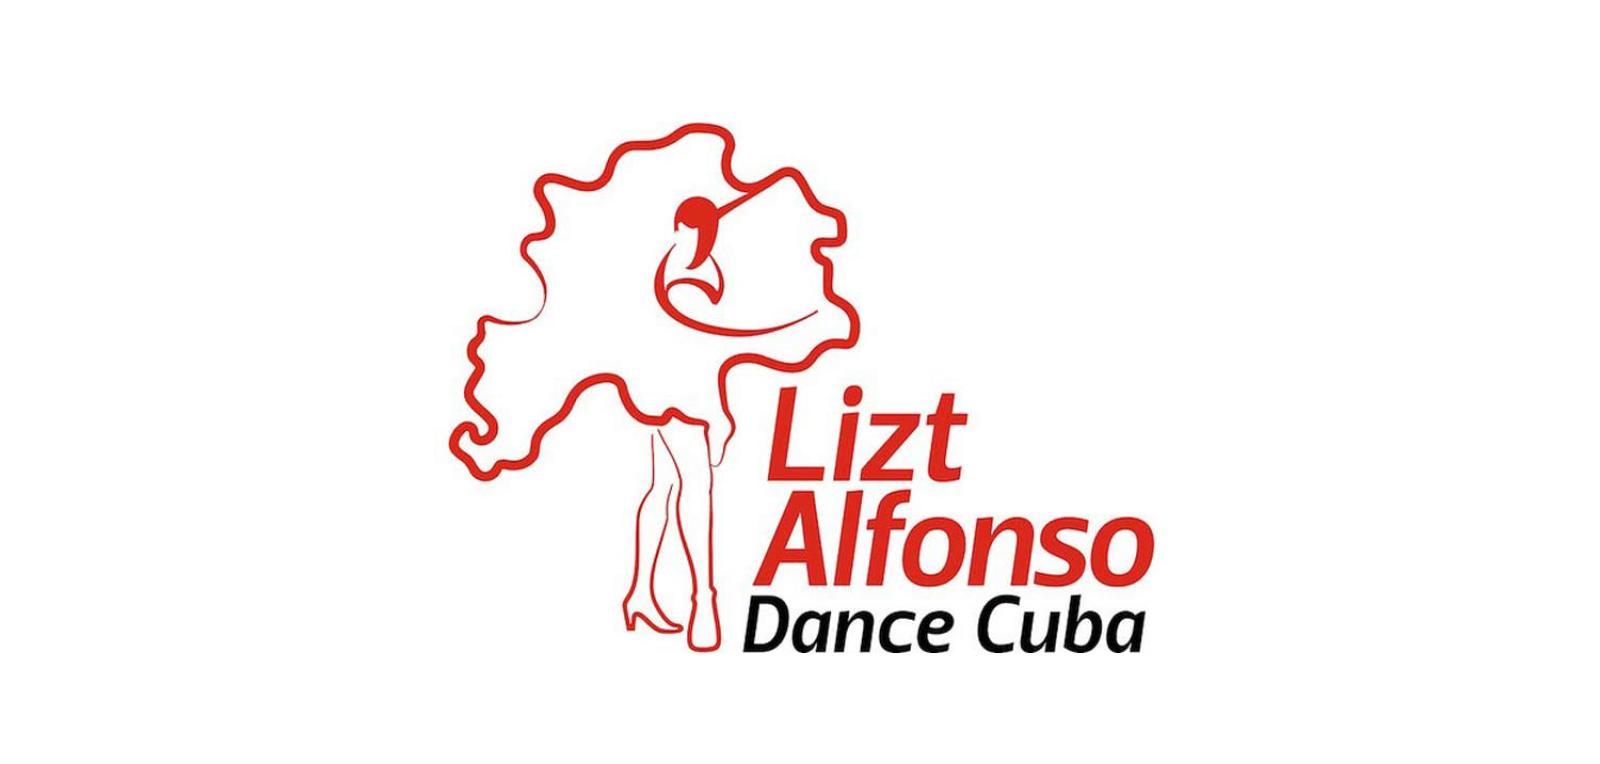 Lizt Alfonso Dance Cuba to close 2020 with digest show